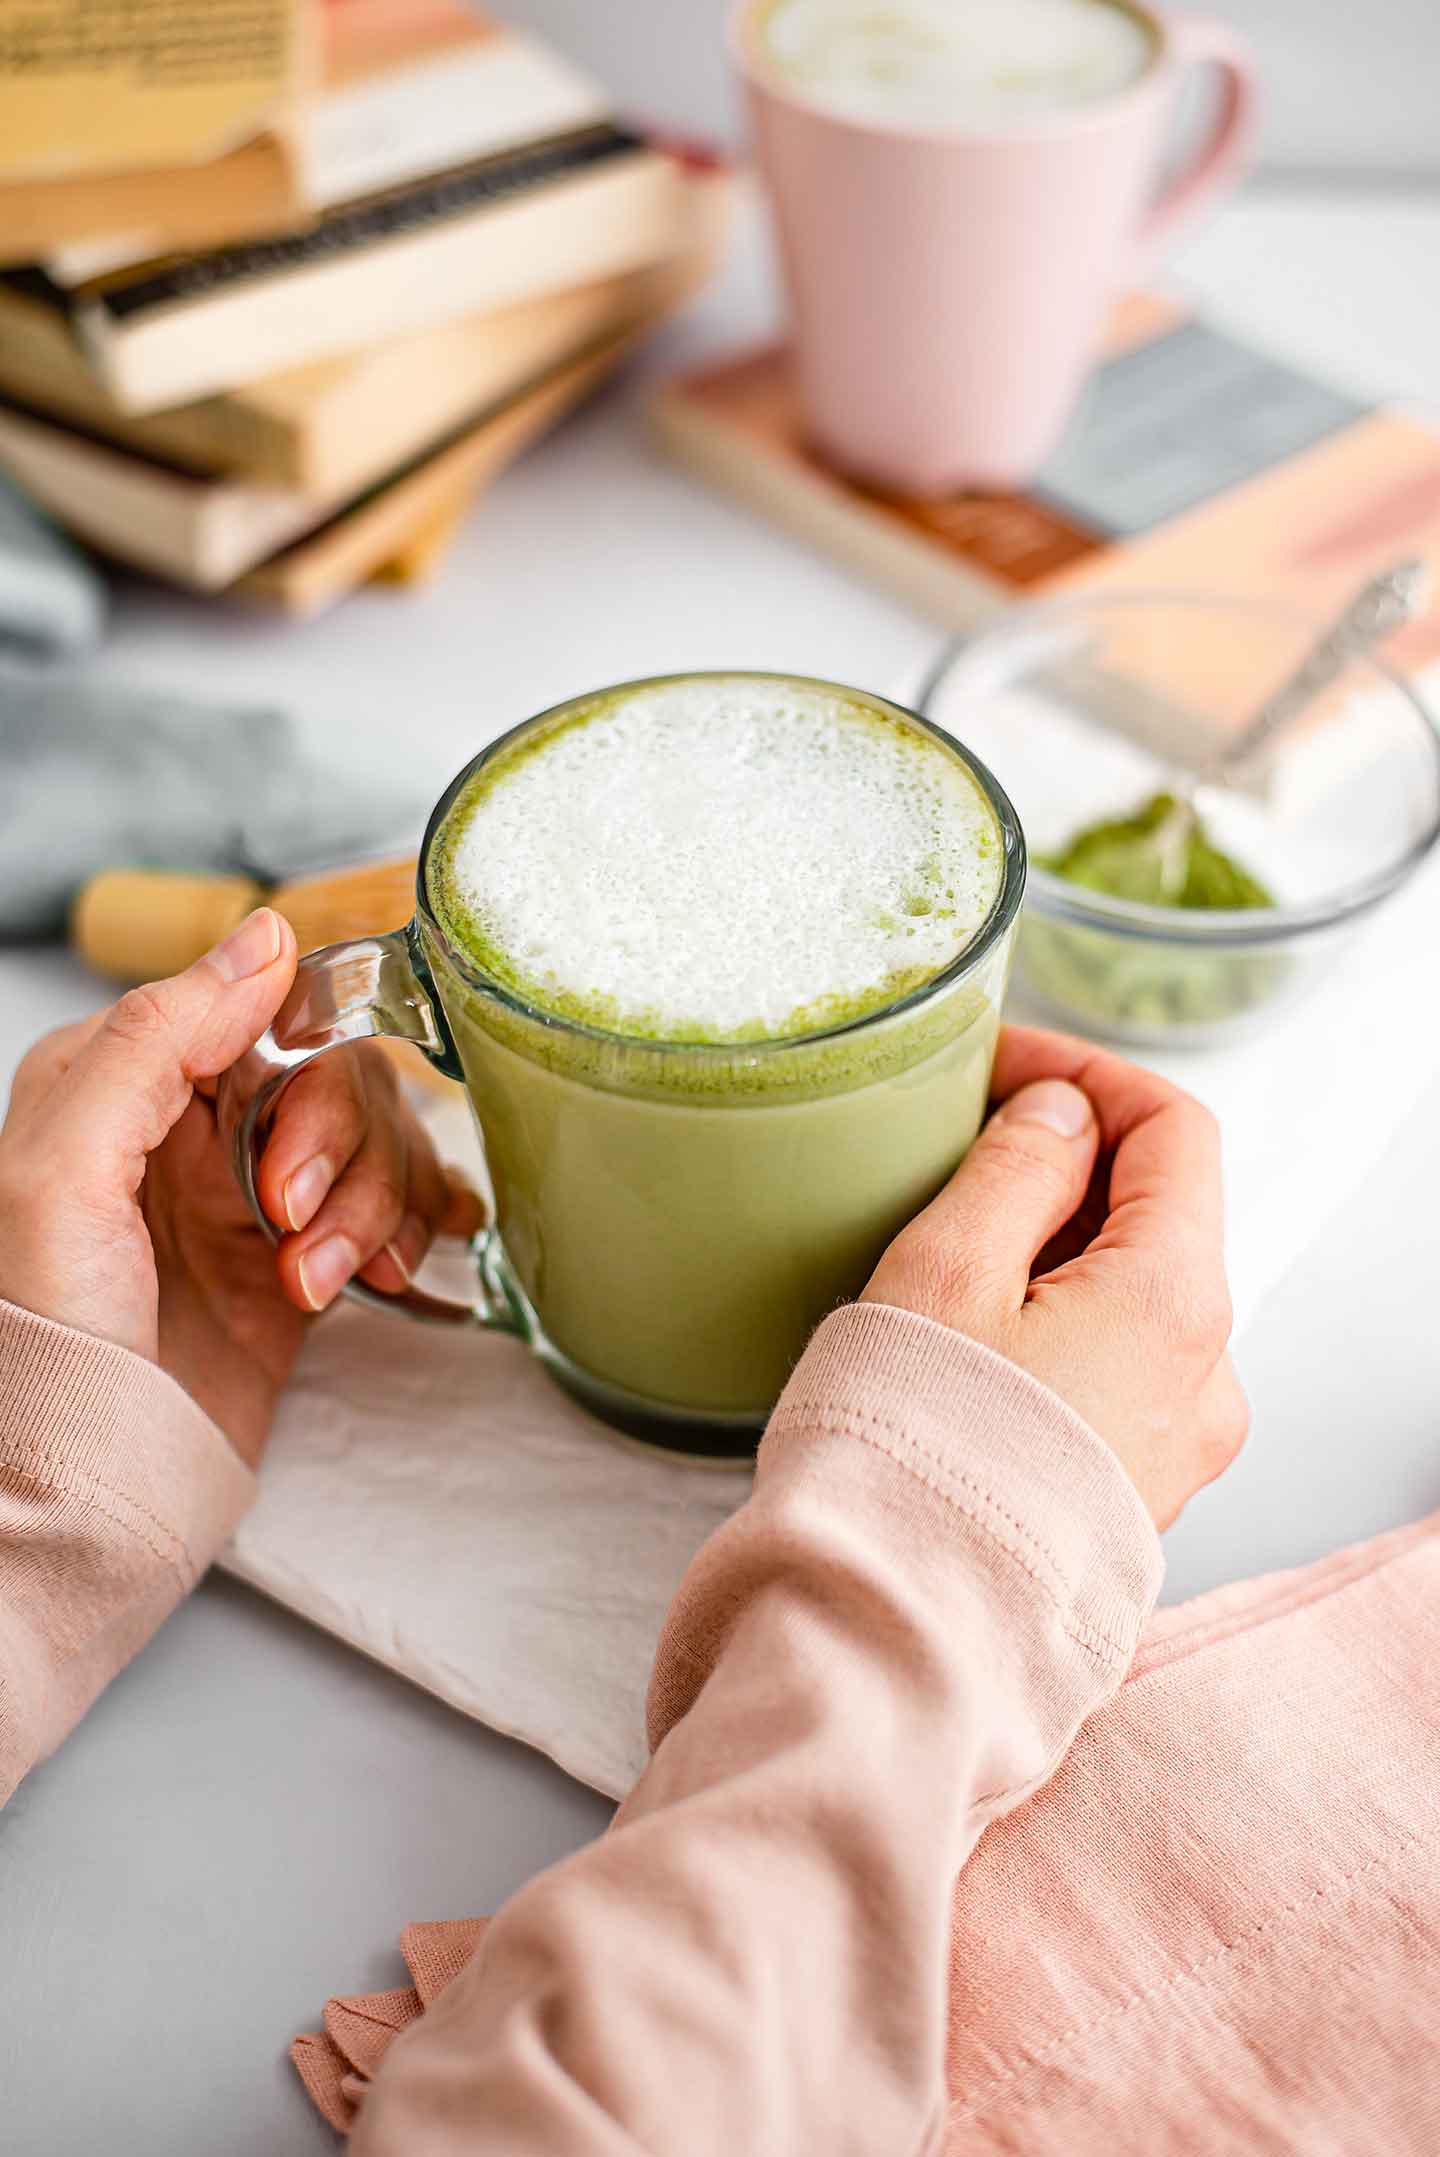 https://tastythriftytimely.com/wp-content/uploads/2021/06/Whisk-A-Quick-At-Home-Matcha-Latte-7.jpg